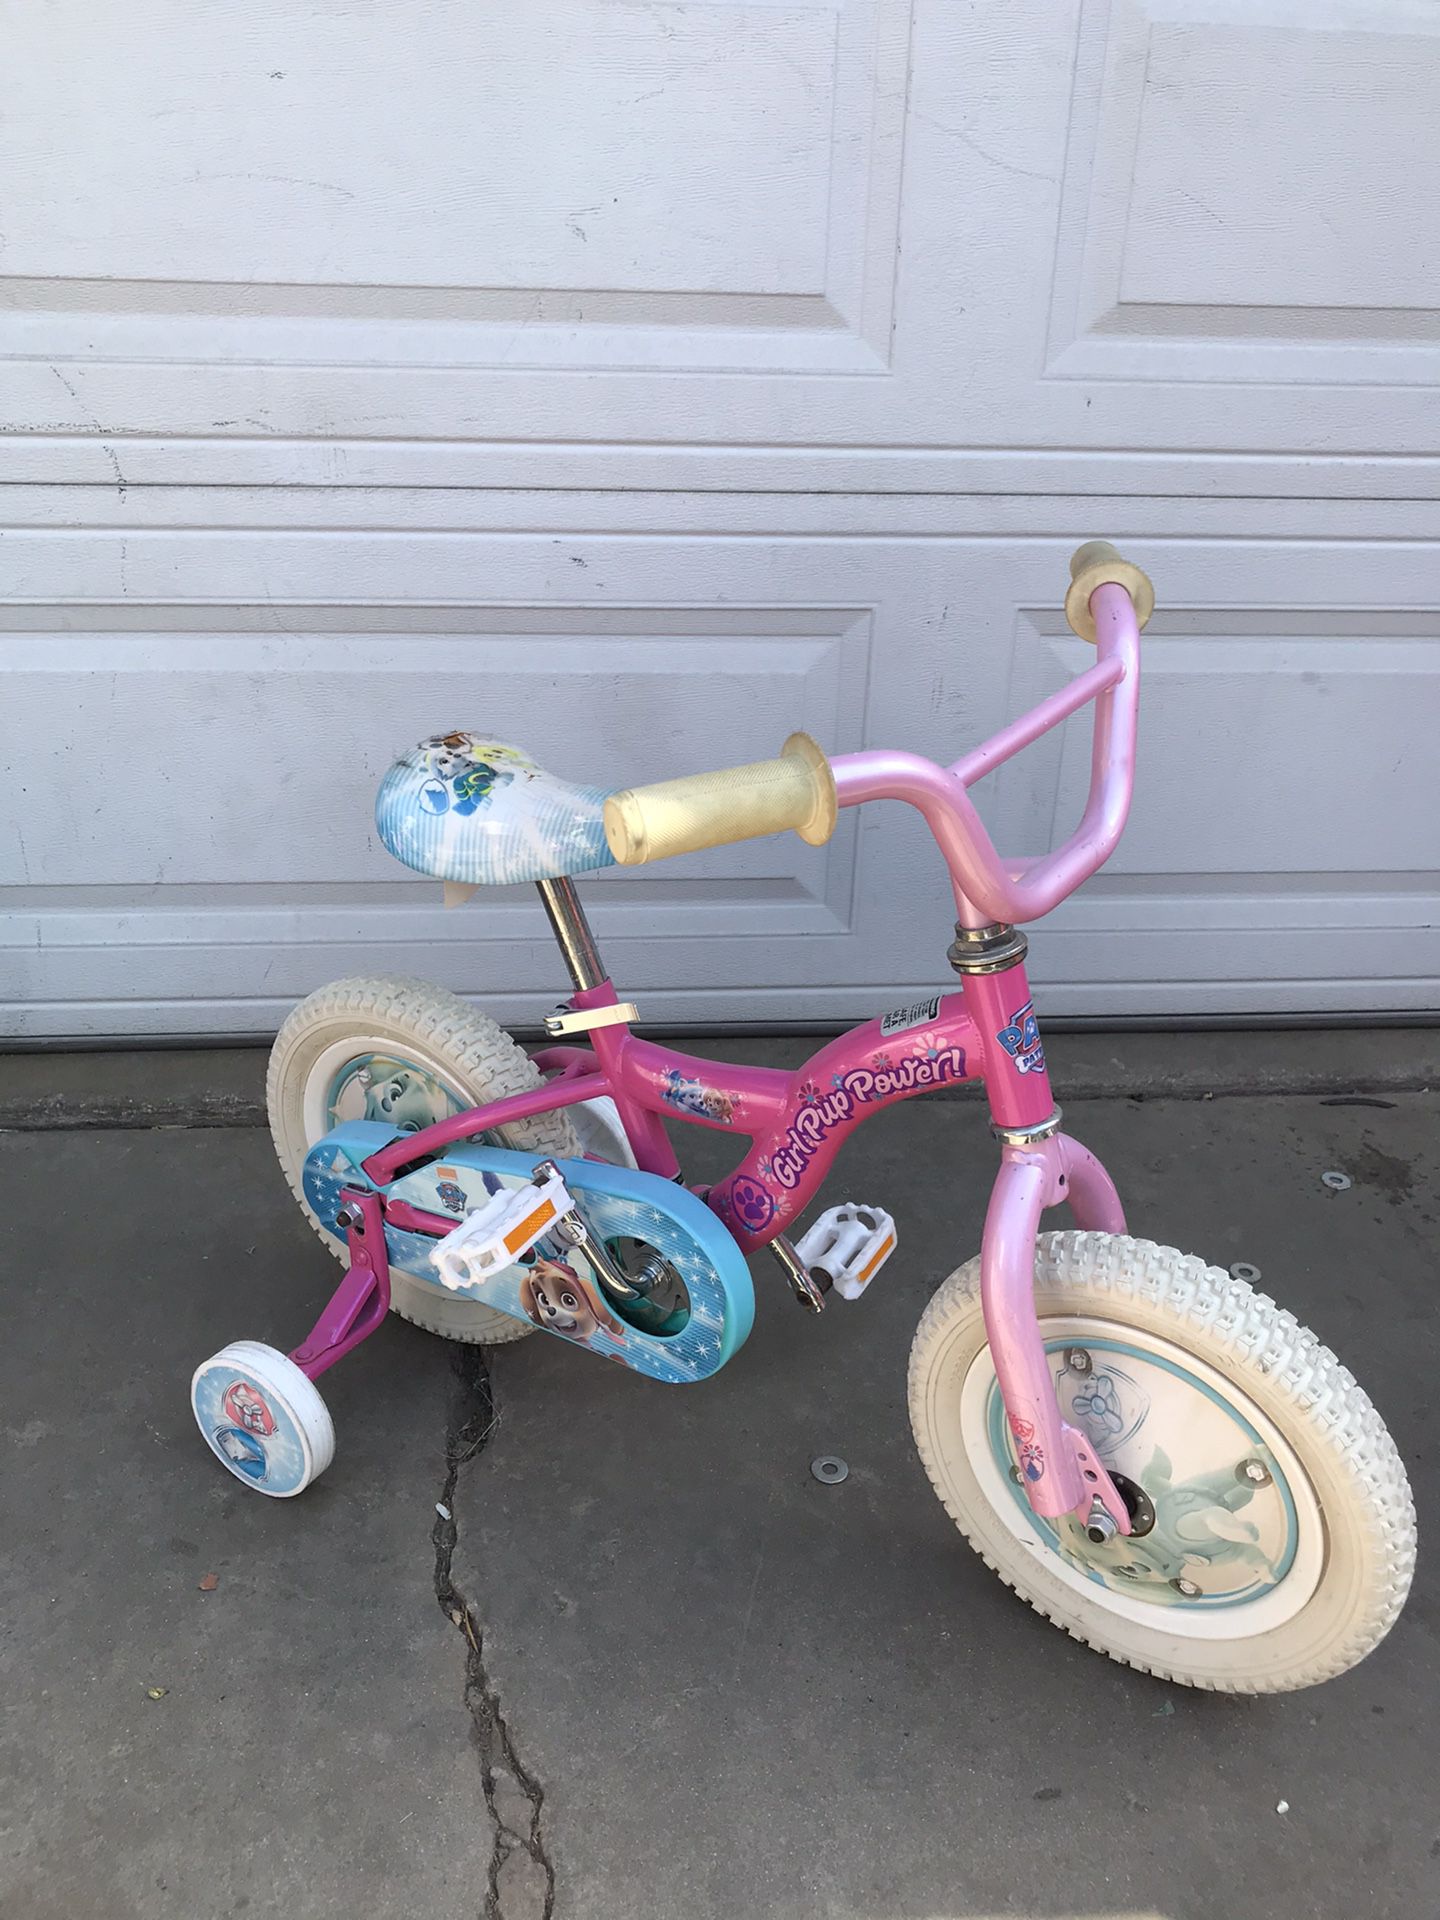 Training wheels bike size 12 1/2 look at all the pictures